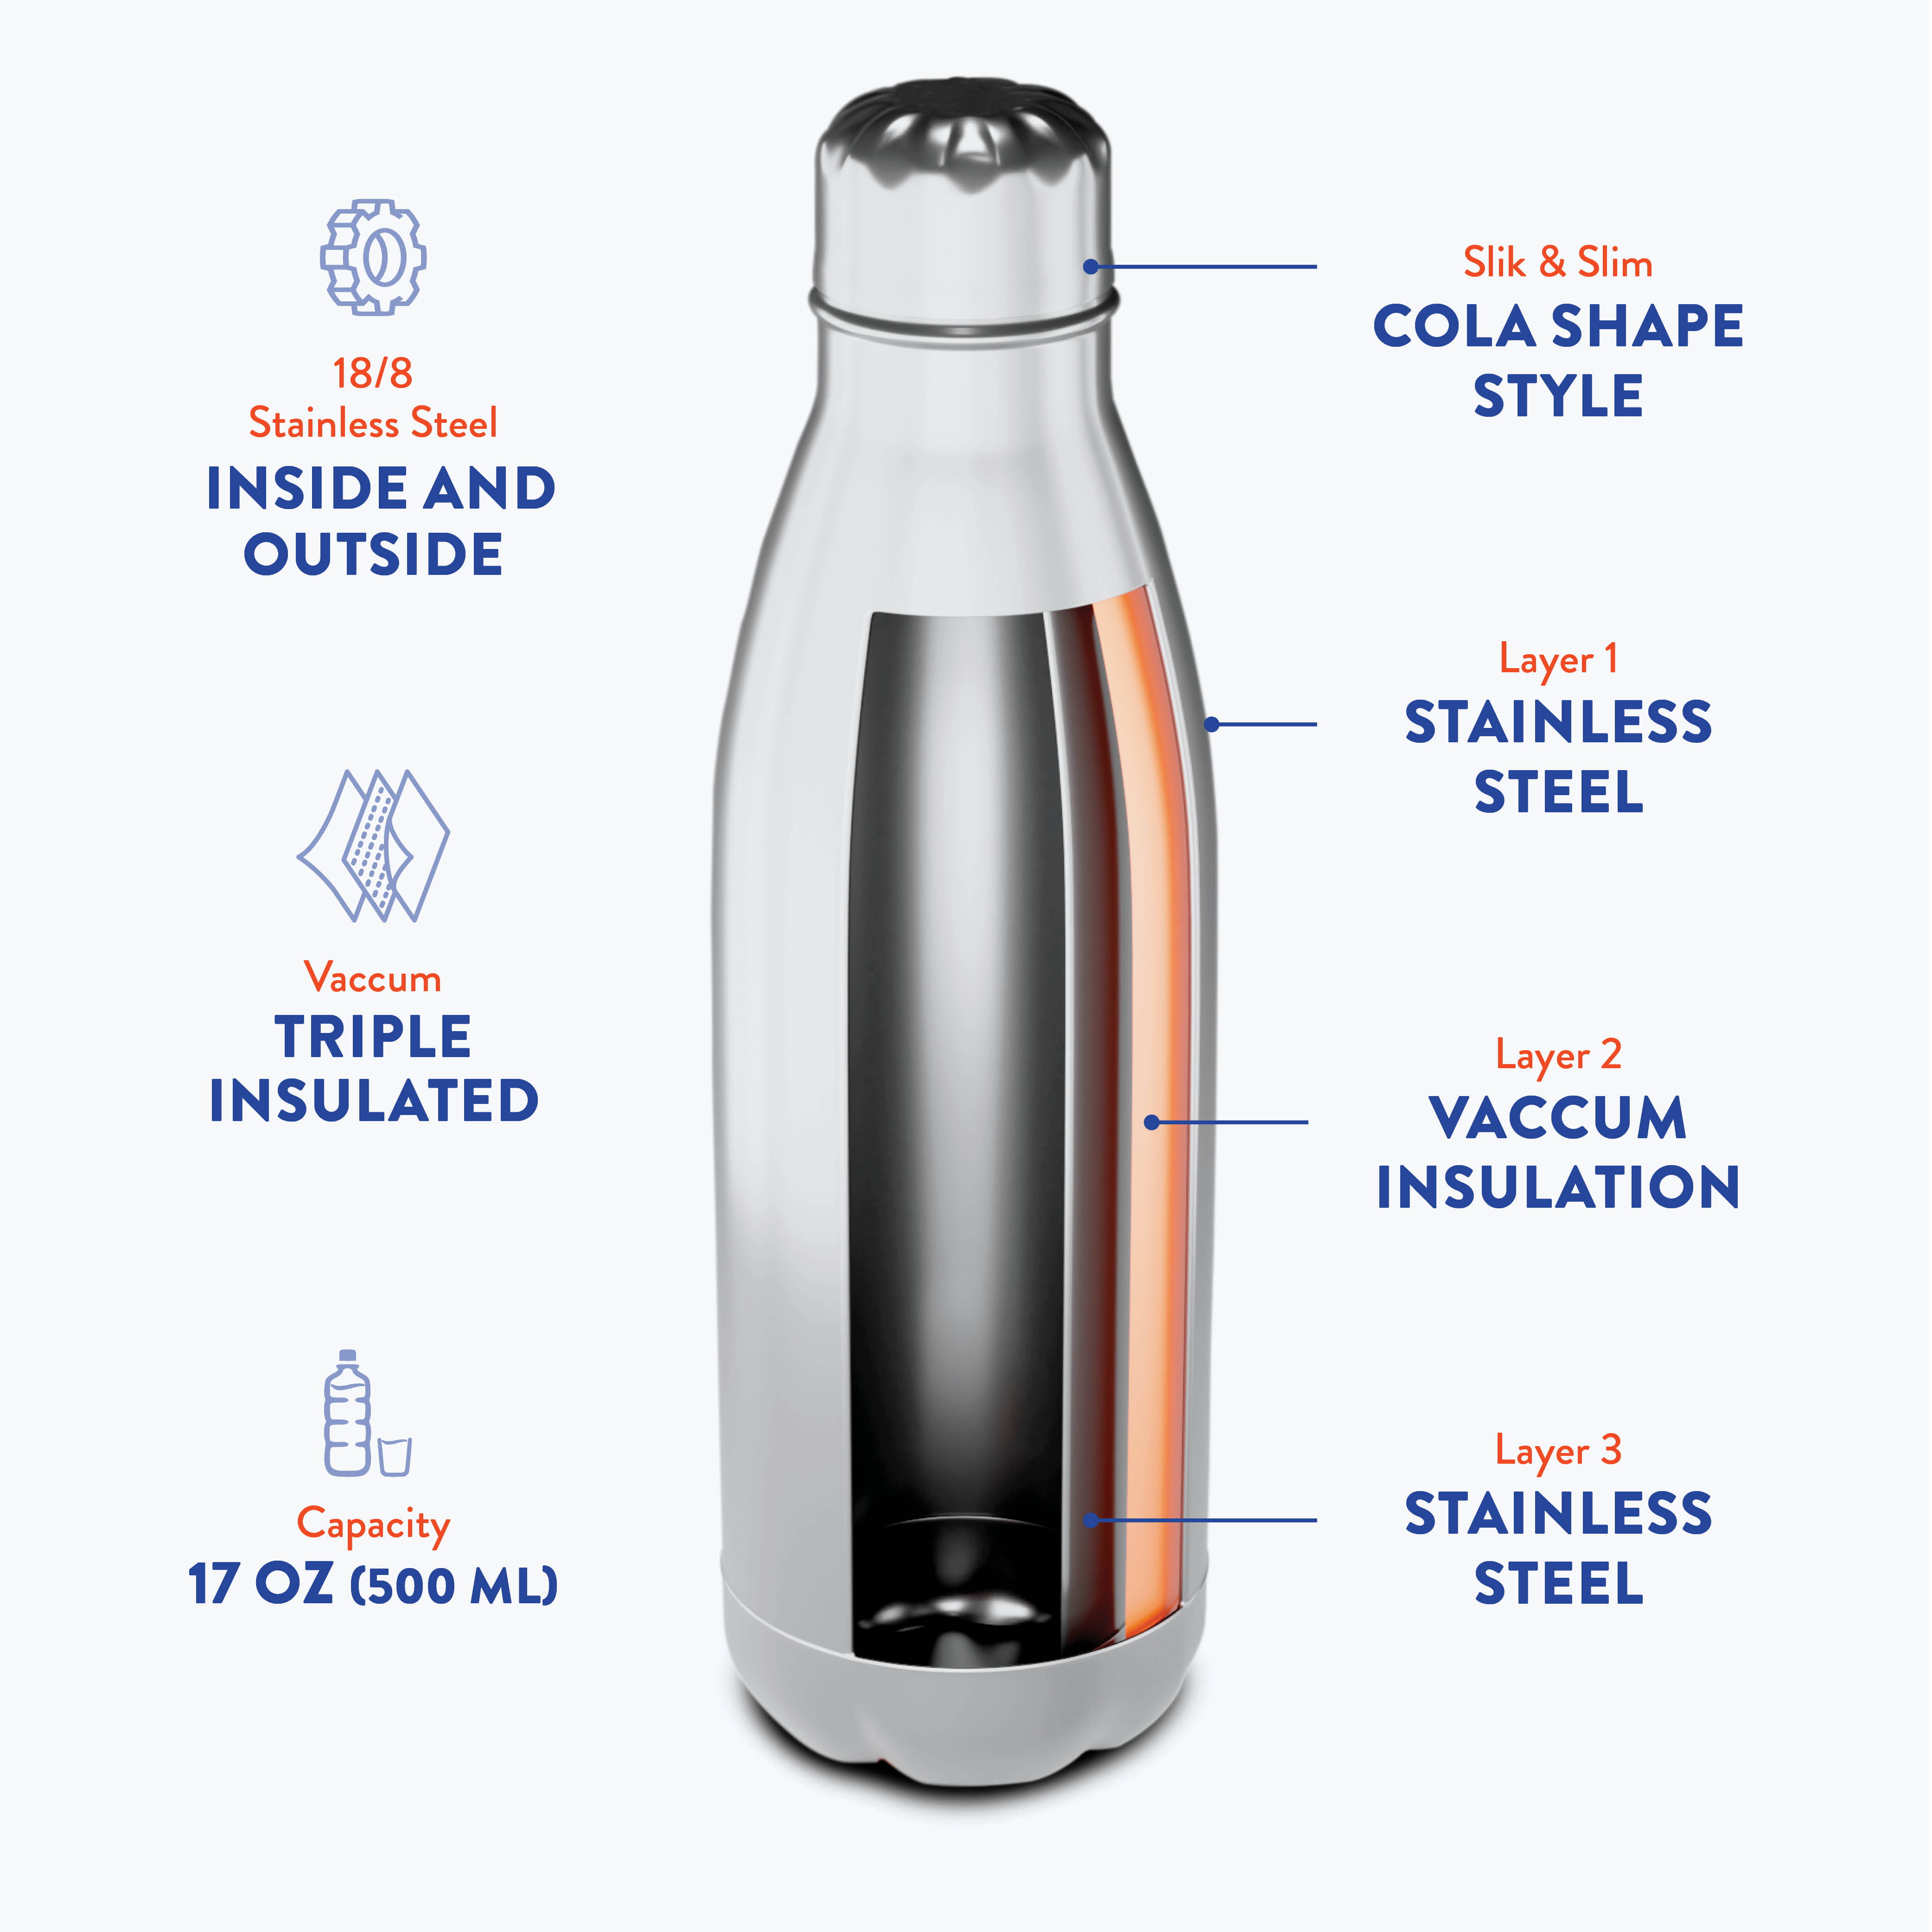 Watersy Triple-Insulated Stainless Steel Water Bottle 17 Ounce /500ml,  Powder Coat Insulated Water Bottles, Keeps Hot and Cold, 100% Leakproof  Lids, Sweatproof Water Bottles, Great for Travel, Picnic& Camping.dark blue